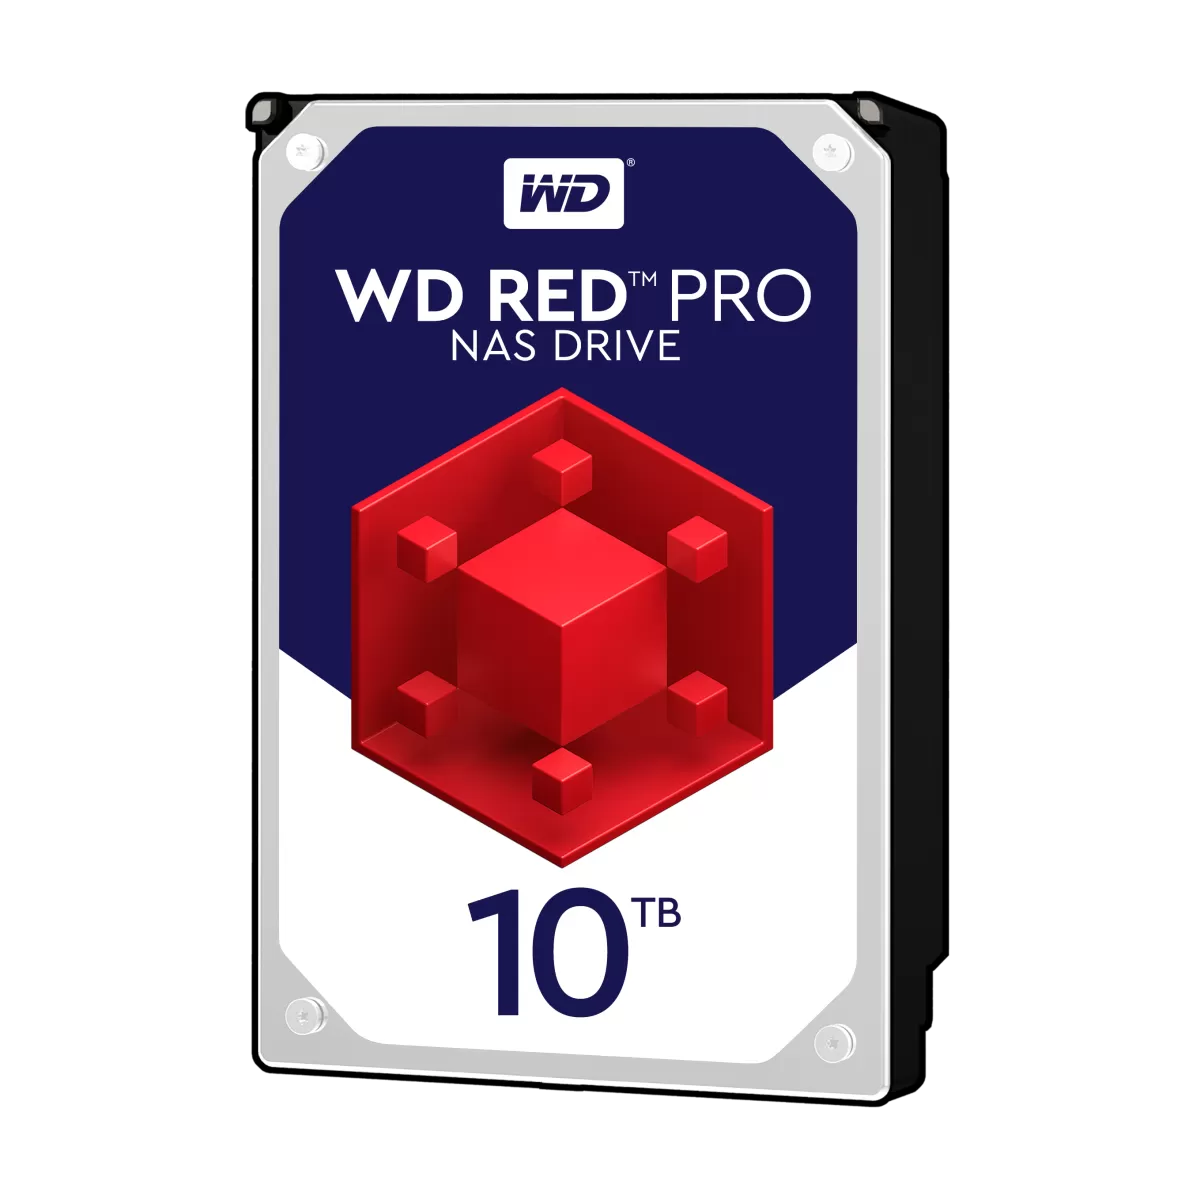 Хард диск HDD 10TB SATAIII WD Red PRO 7200rpm 256MB for NAS and Servers (5 years warranty)